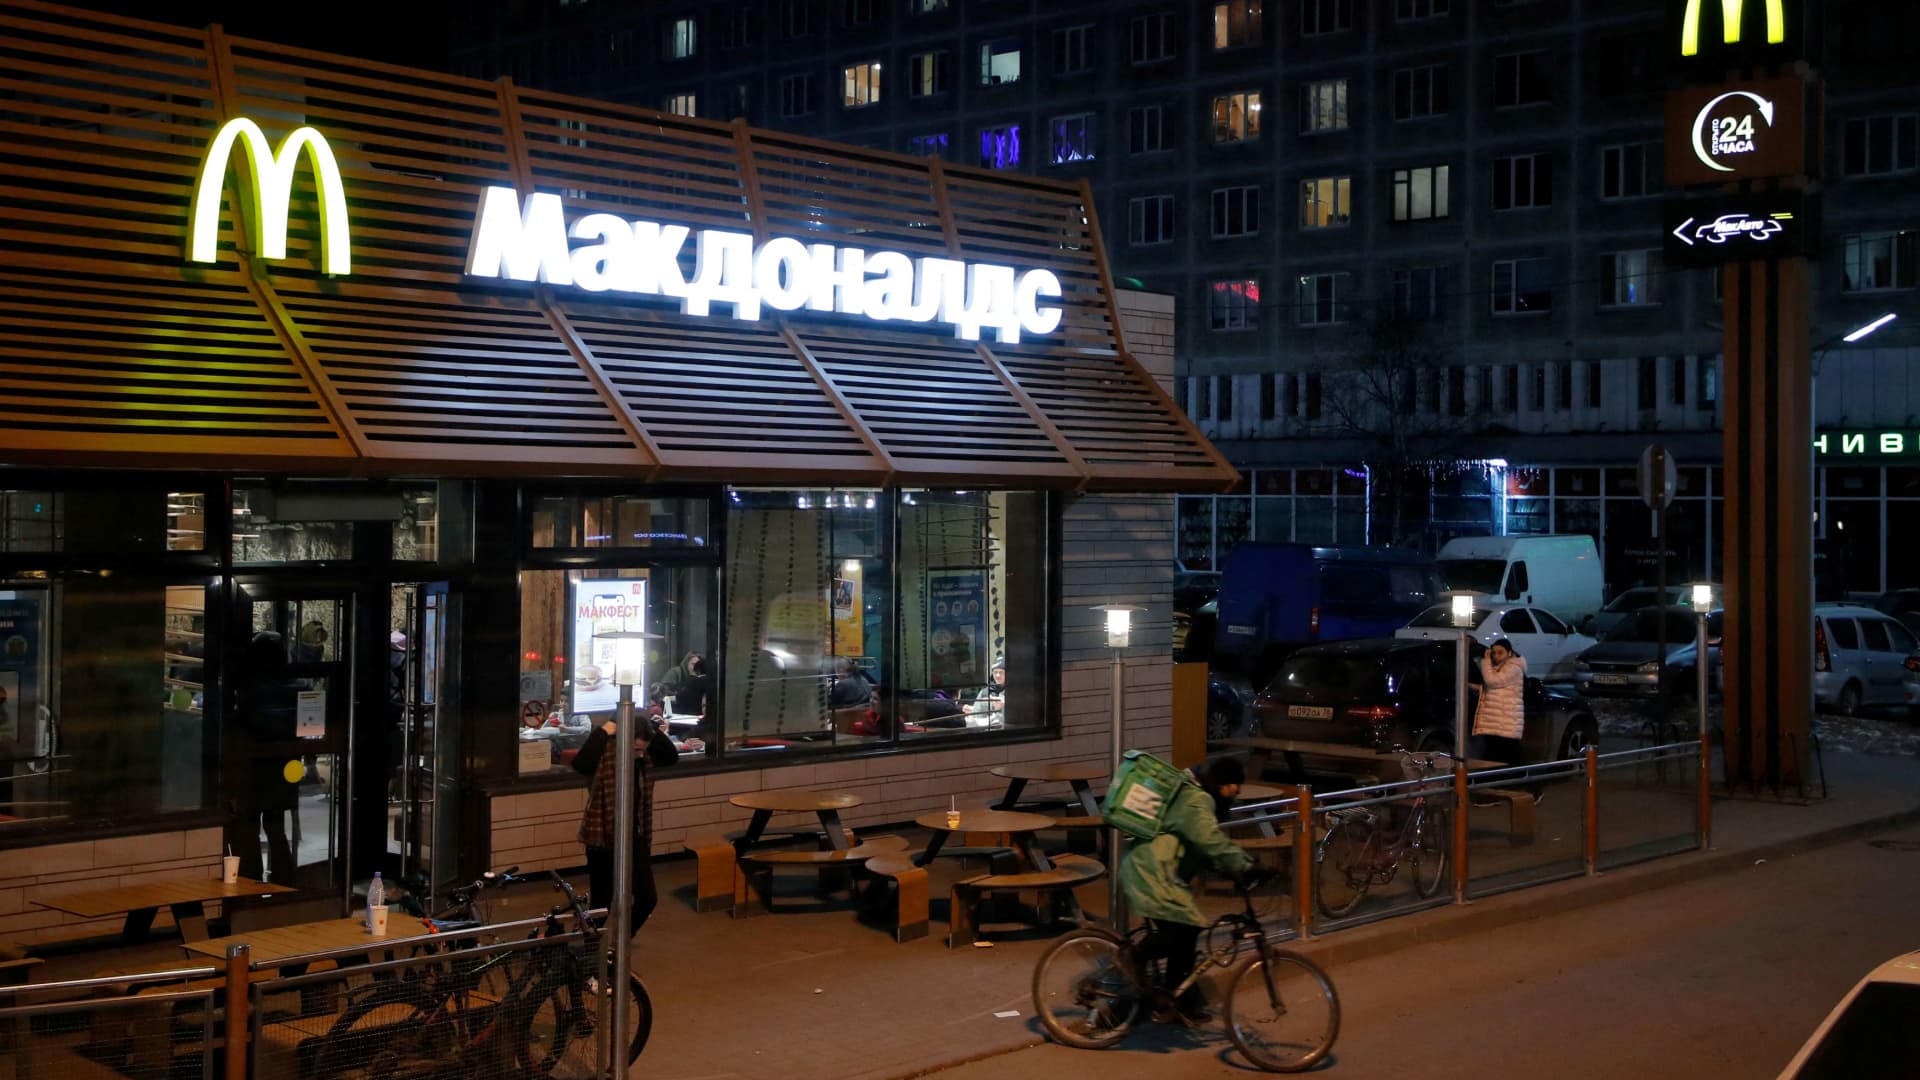 McDonald’s to sell Russia business after pausing operations due to Ukraine war